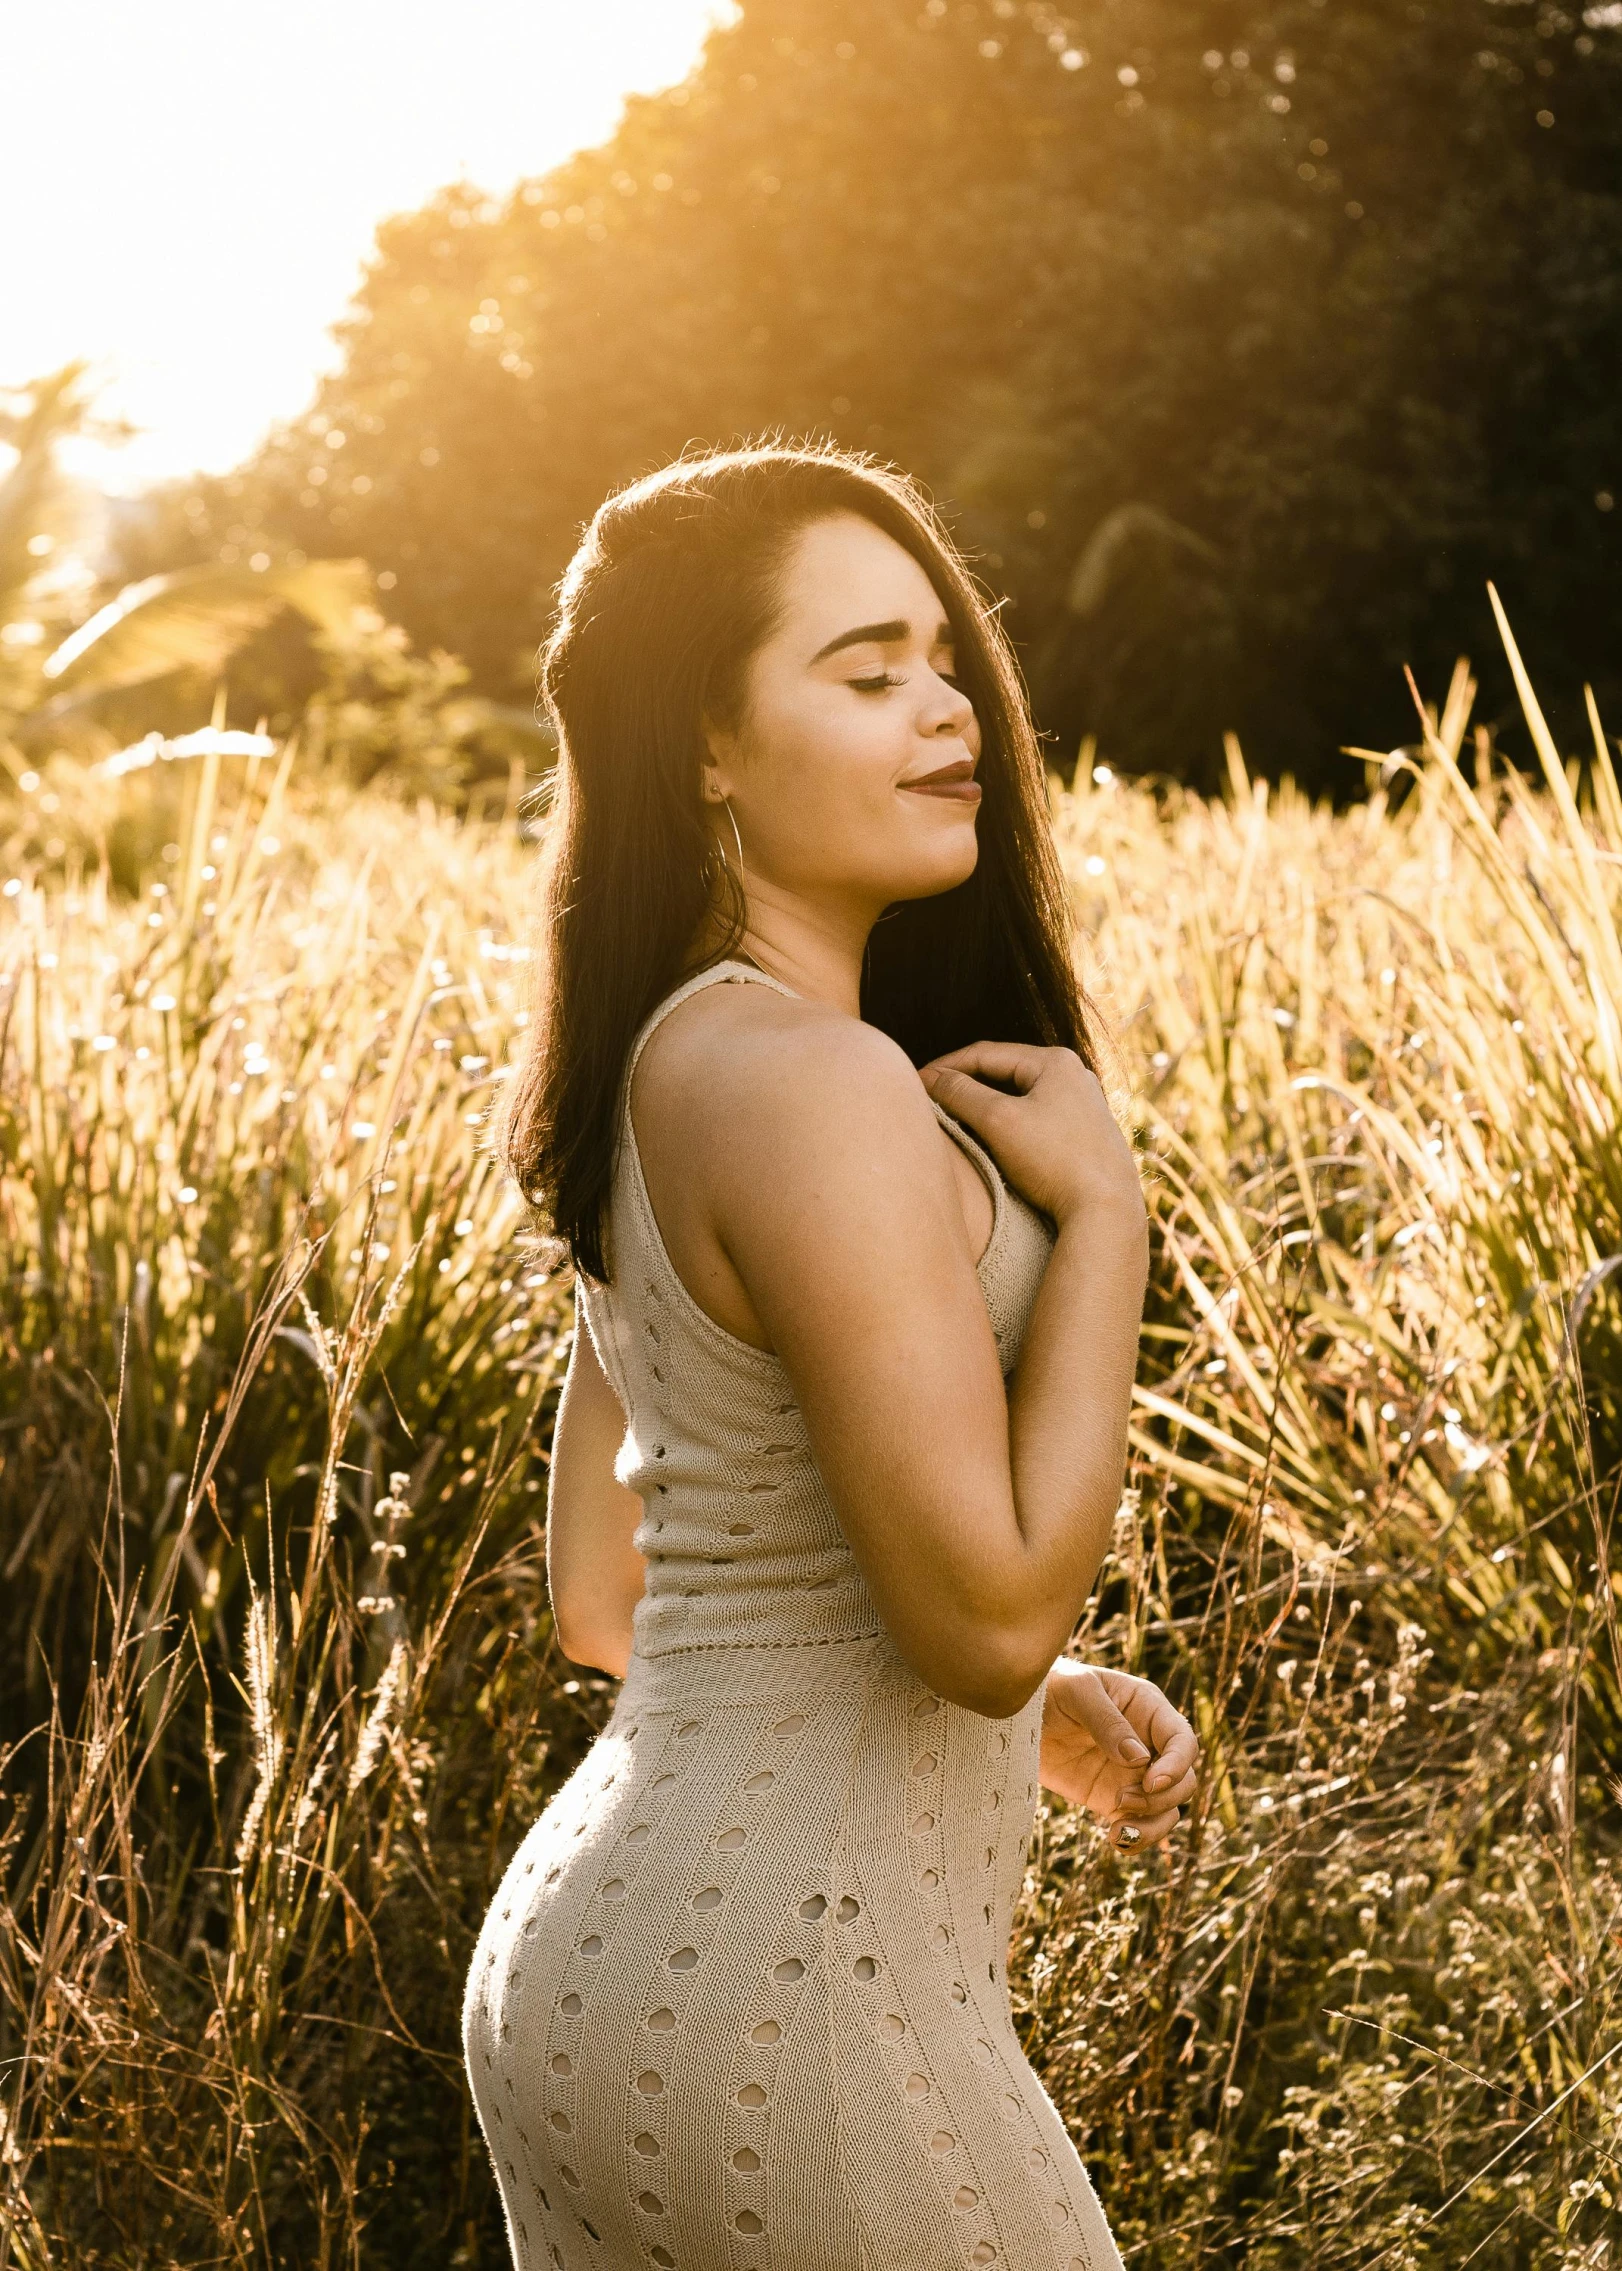 a woman standing in a field of tall grass, inspired by Elsa Bleda, pexels contest winner, happening, light skin, golden hour 8k, satisfied pose, avatar image